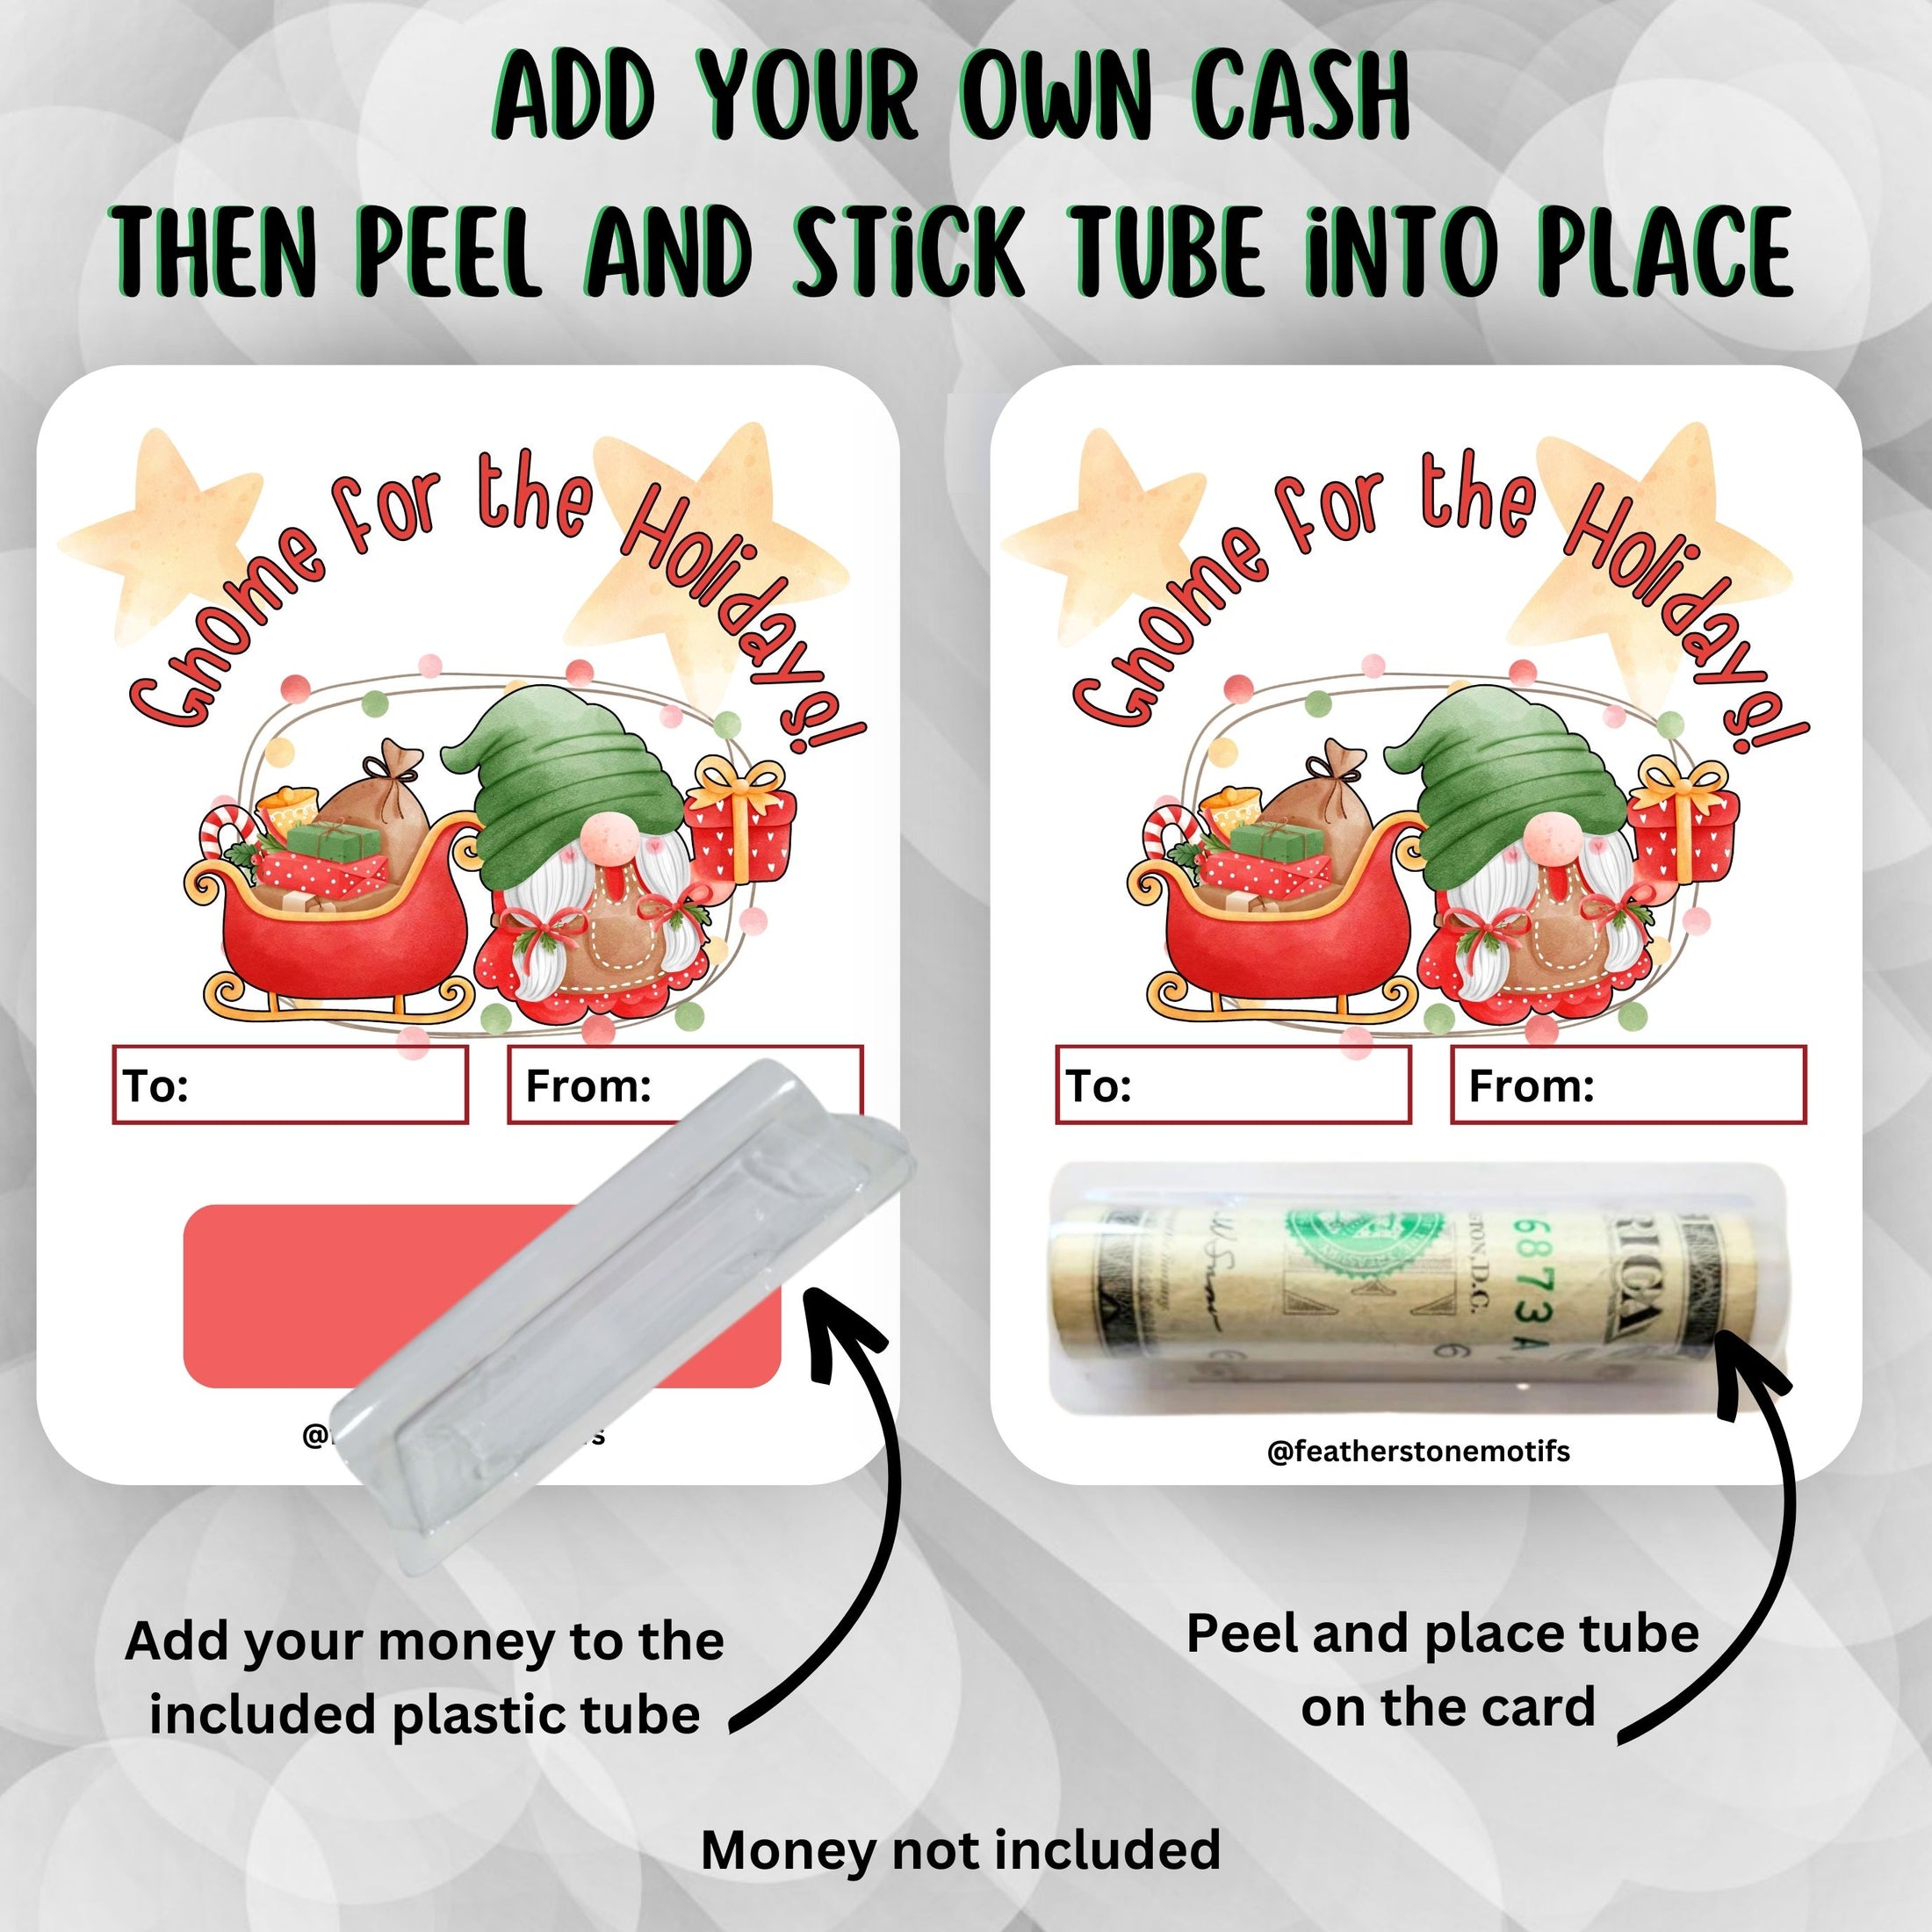 This image shows how to apply the money tube to the money card.